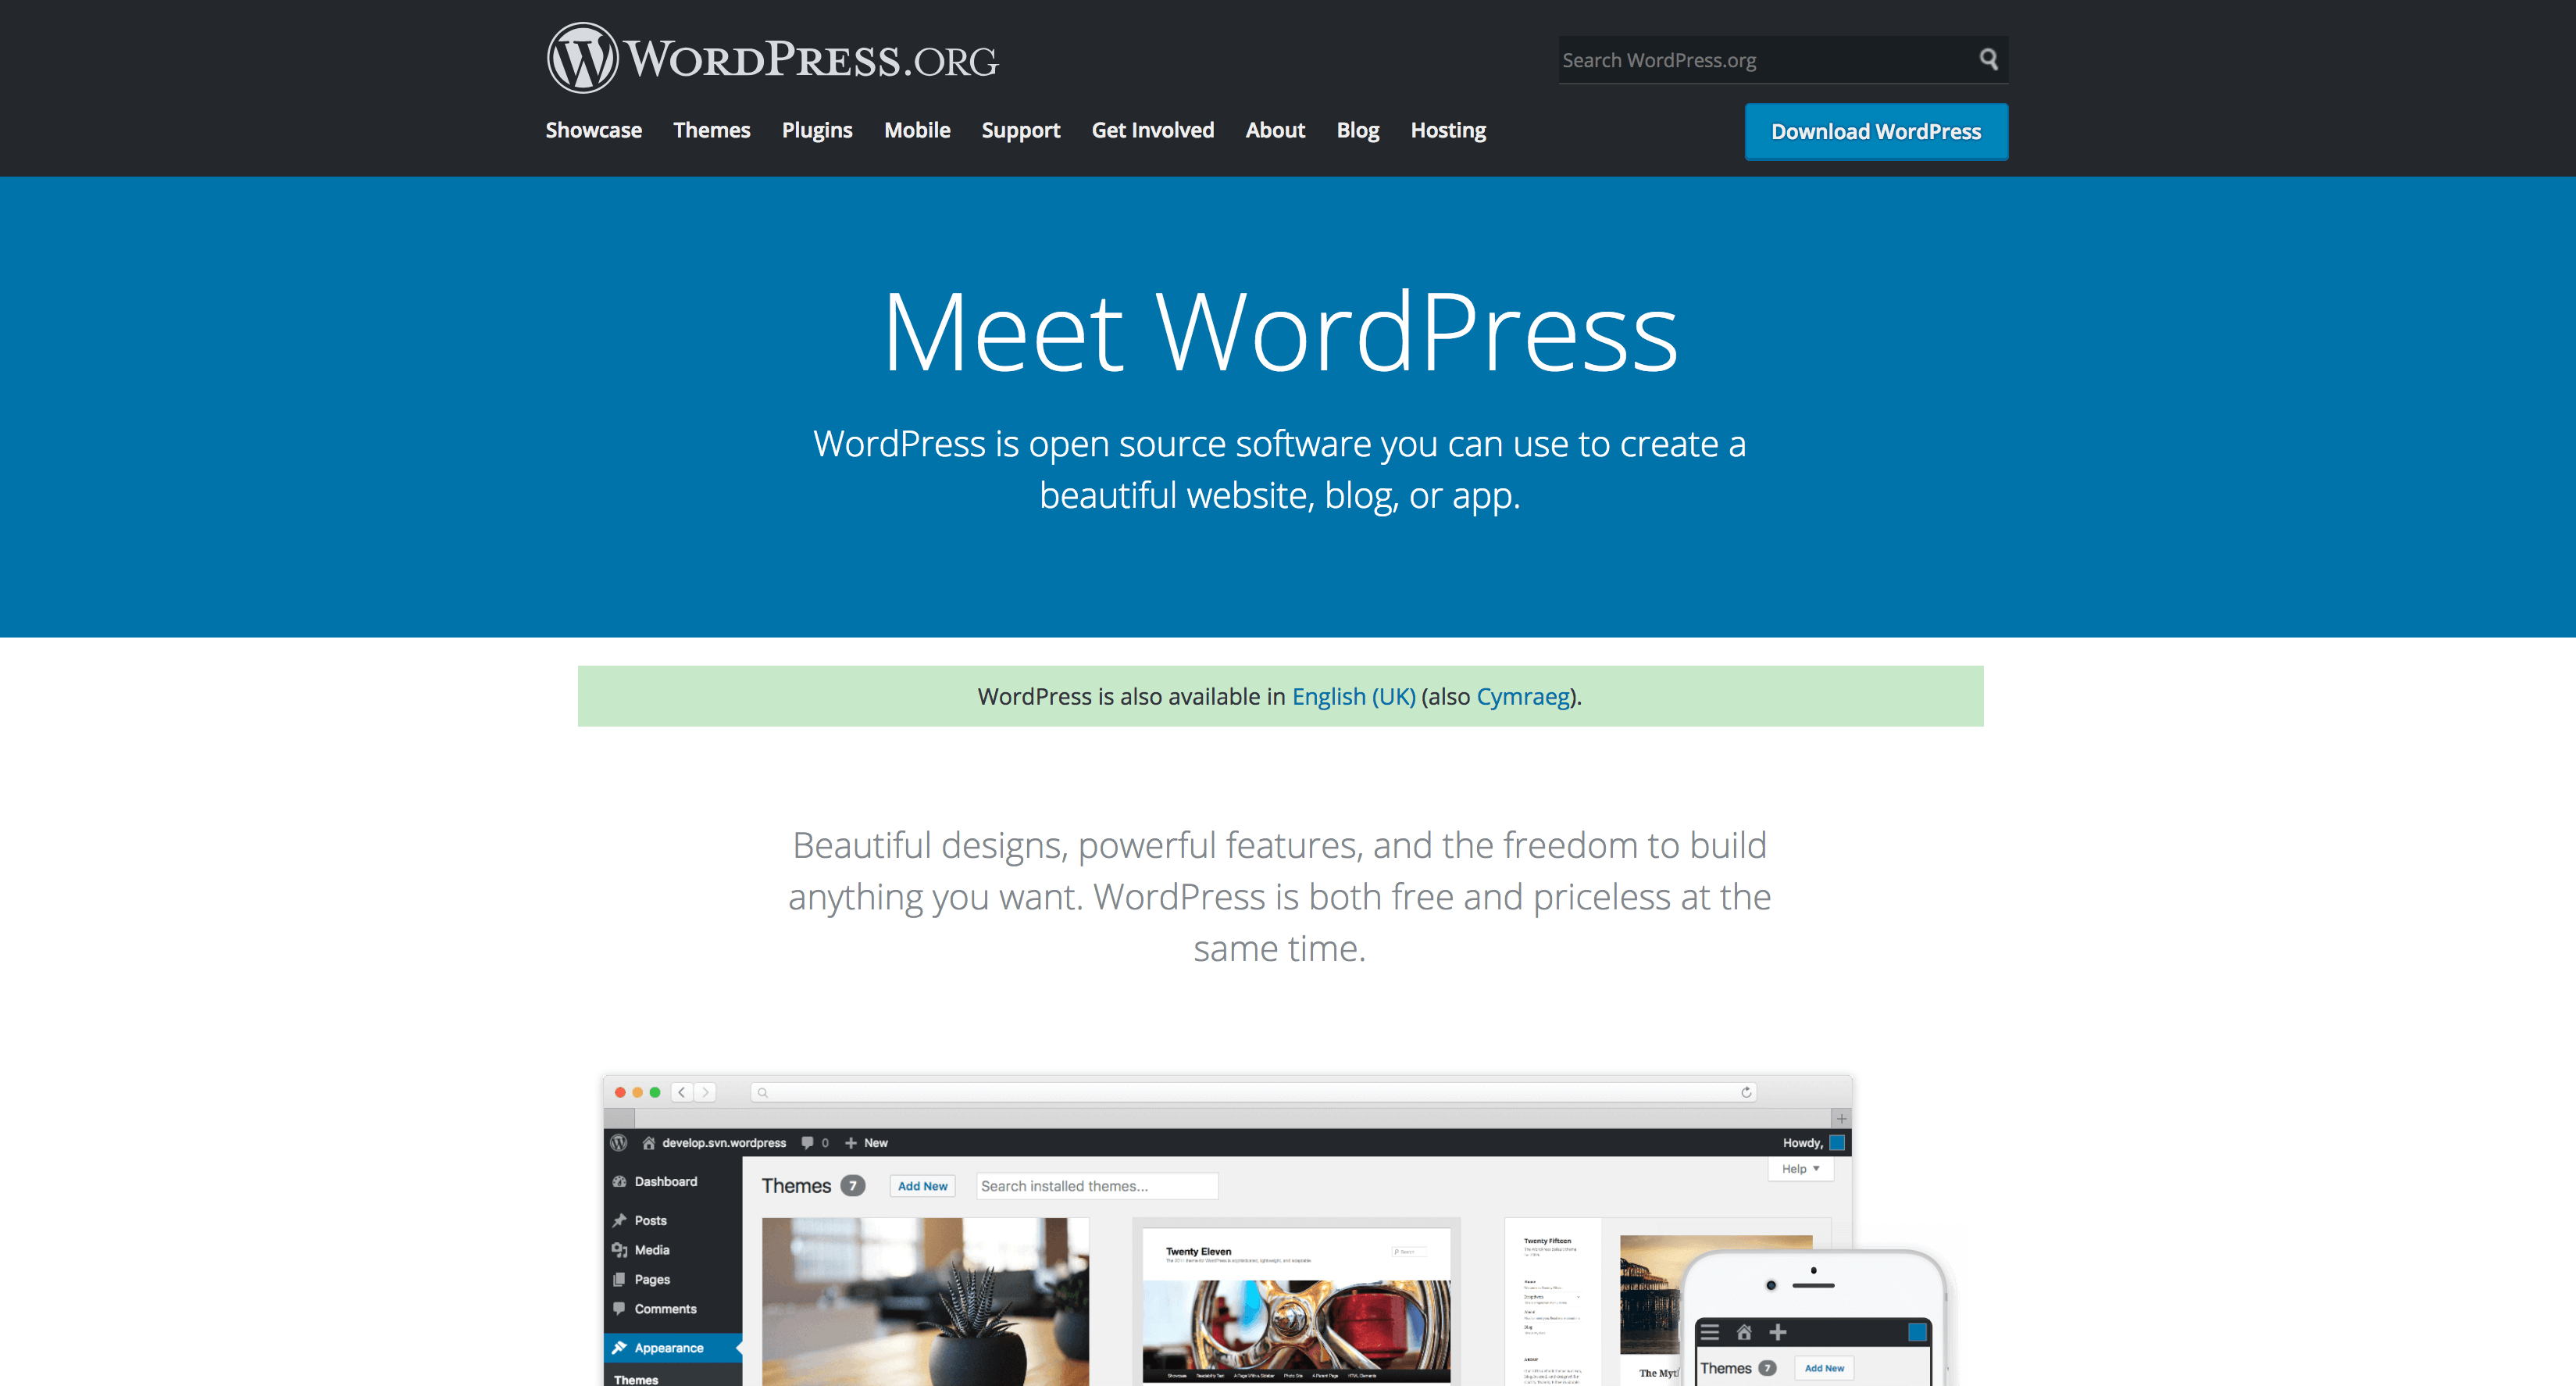 The WordPress.org home page.